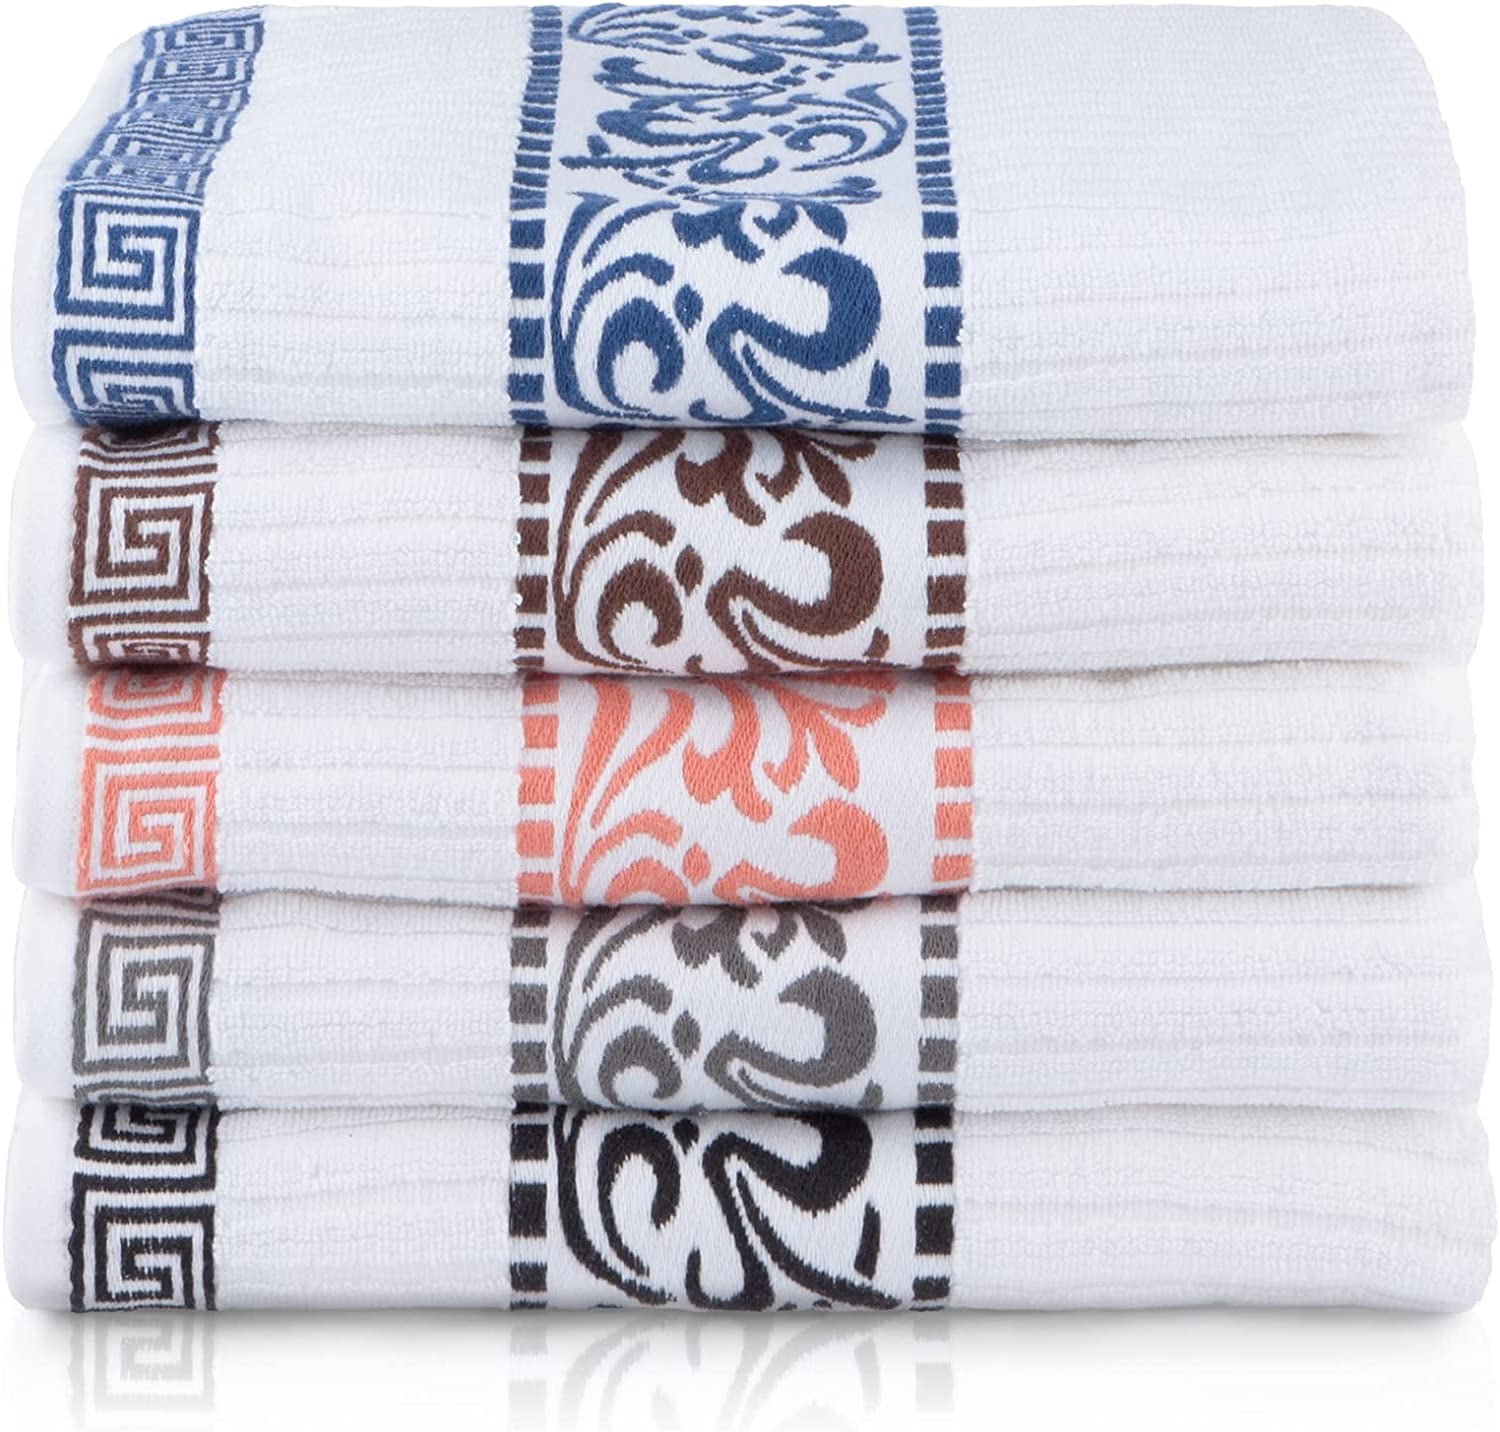 SUPERIOR Bath and Hand Towel Set, Rayon from Bamboo Cotton Blend, Ideal for  Bathroom, Guest Bathroom, and Beach 6 Pieces Hand Towels 16” x 30” and 2